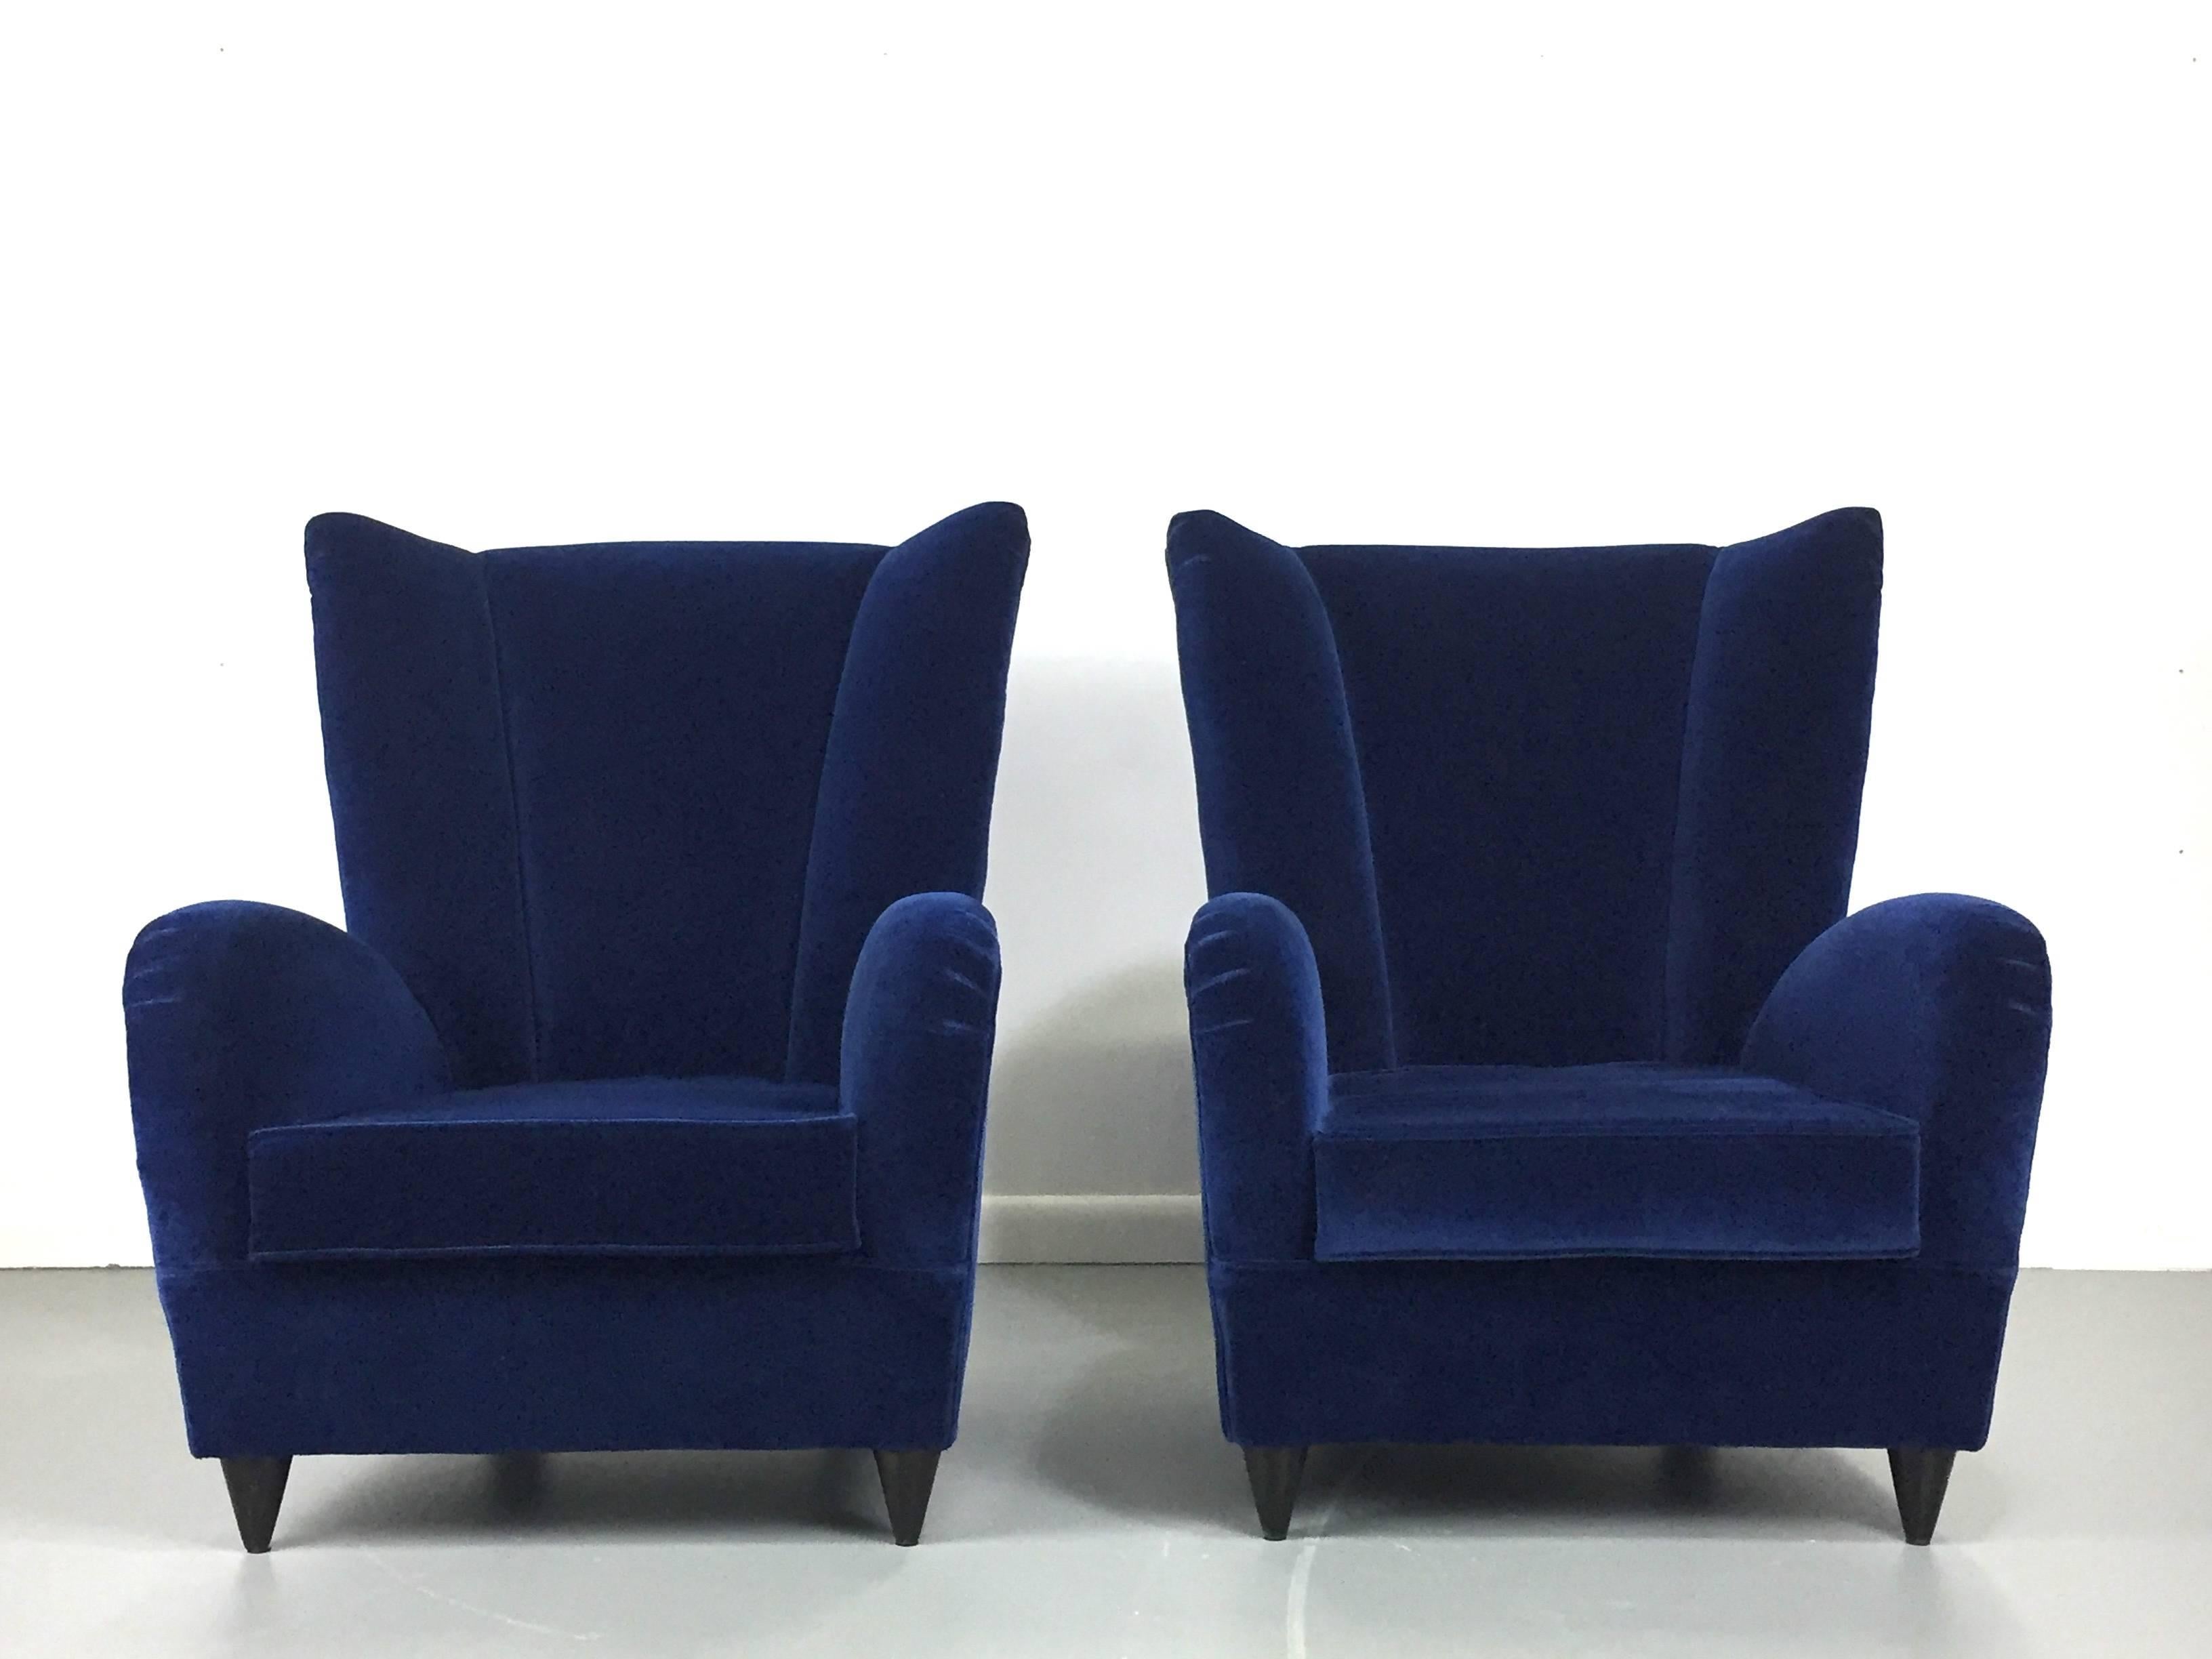 20th Century Paola Buffa Lounge Chairs in Navy Velvet, a Pair